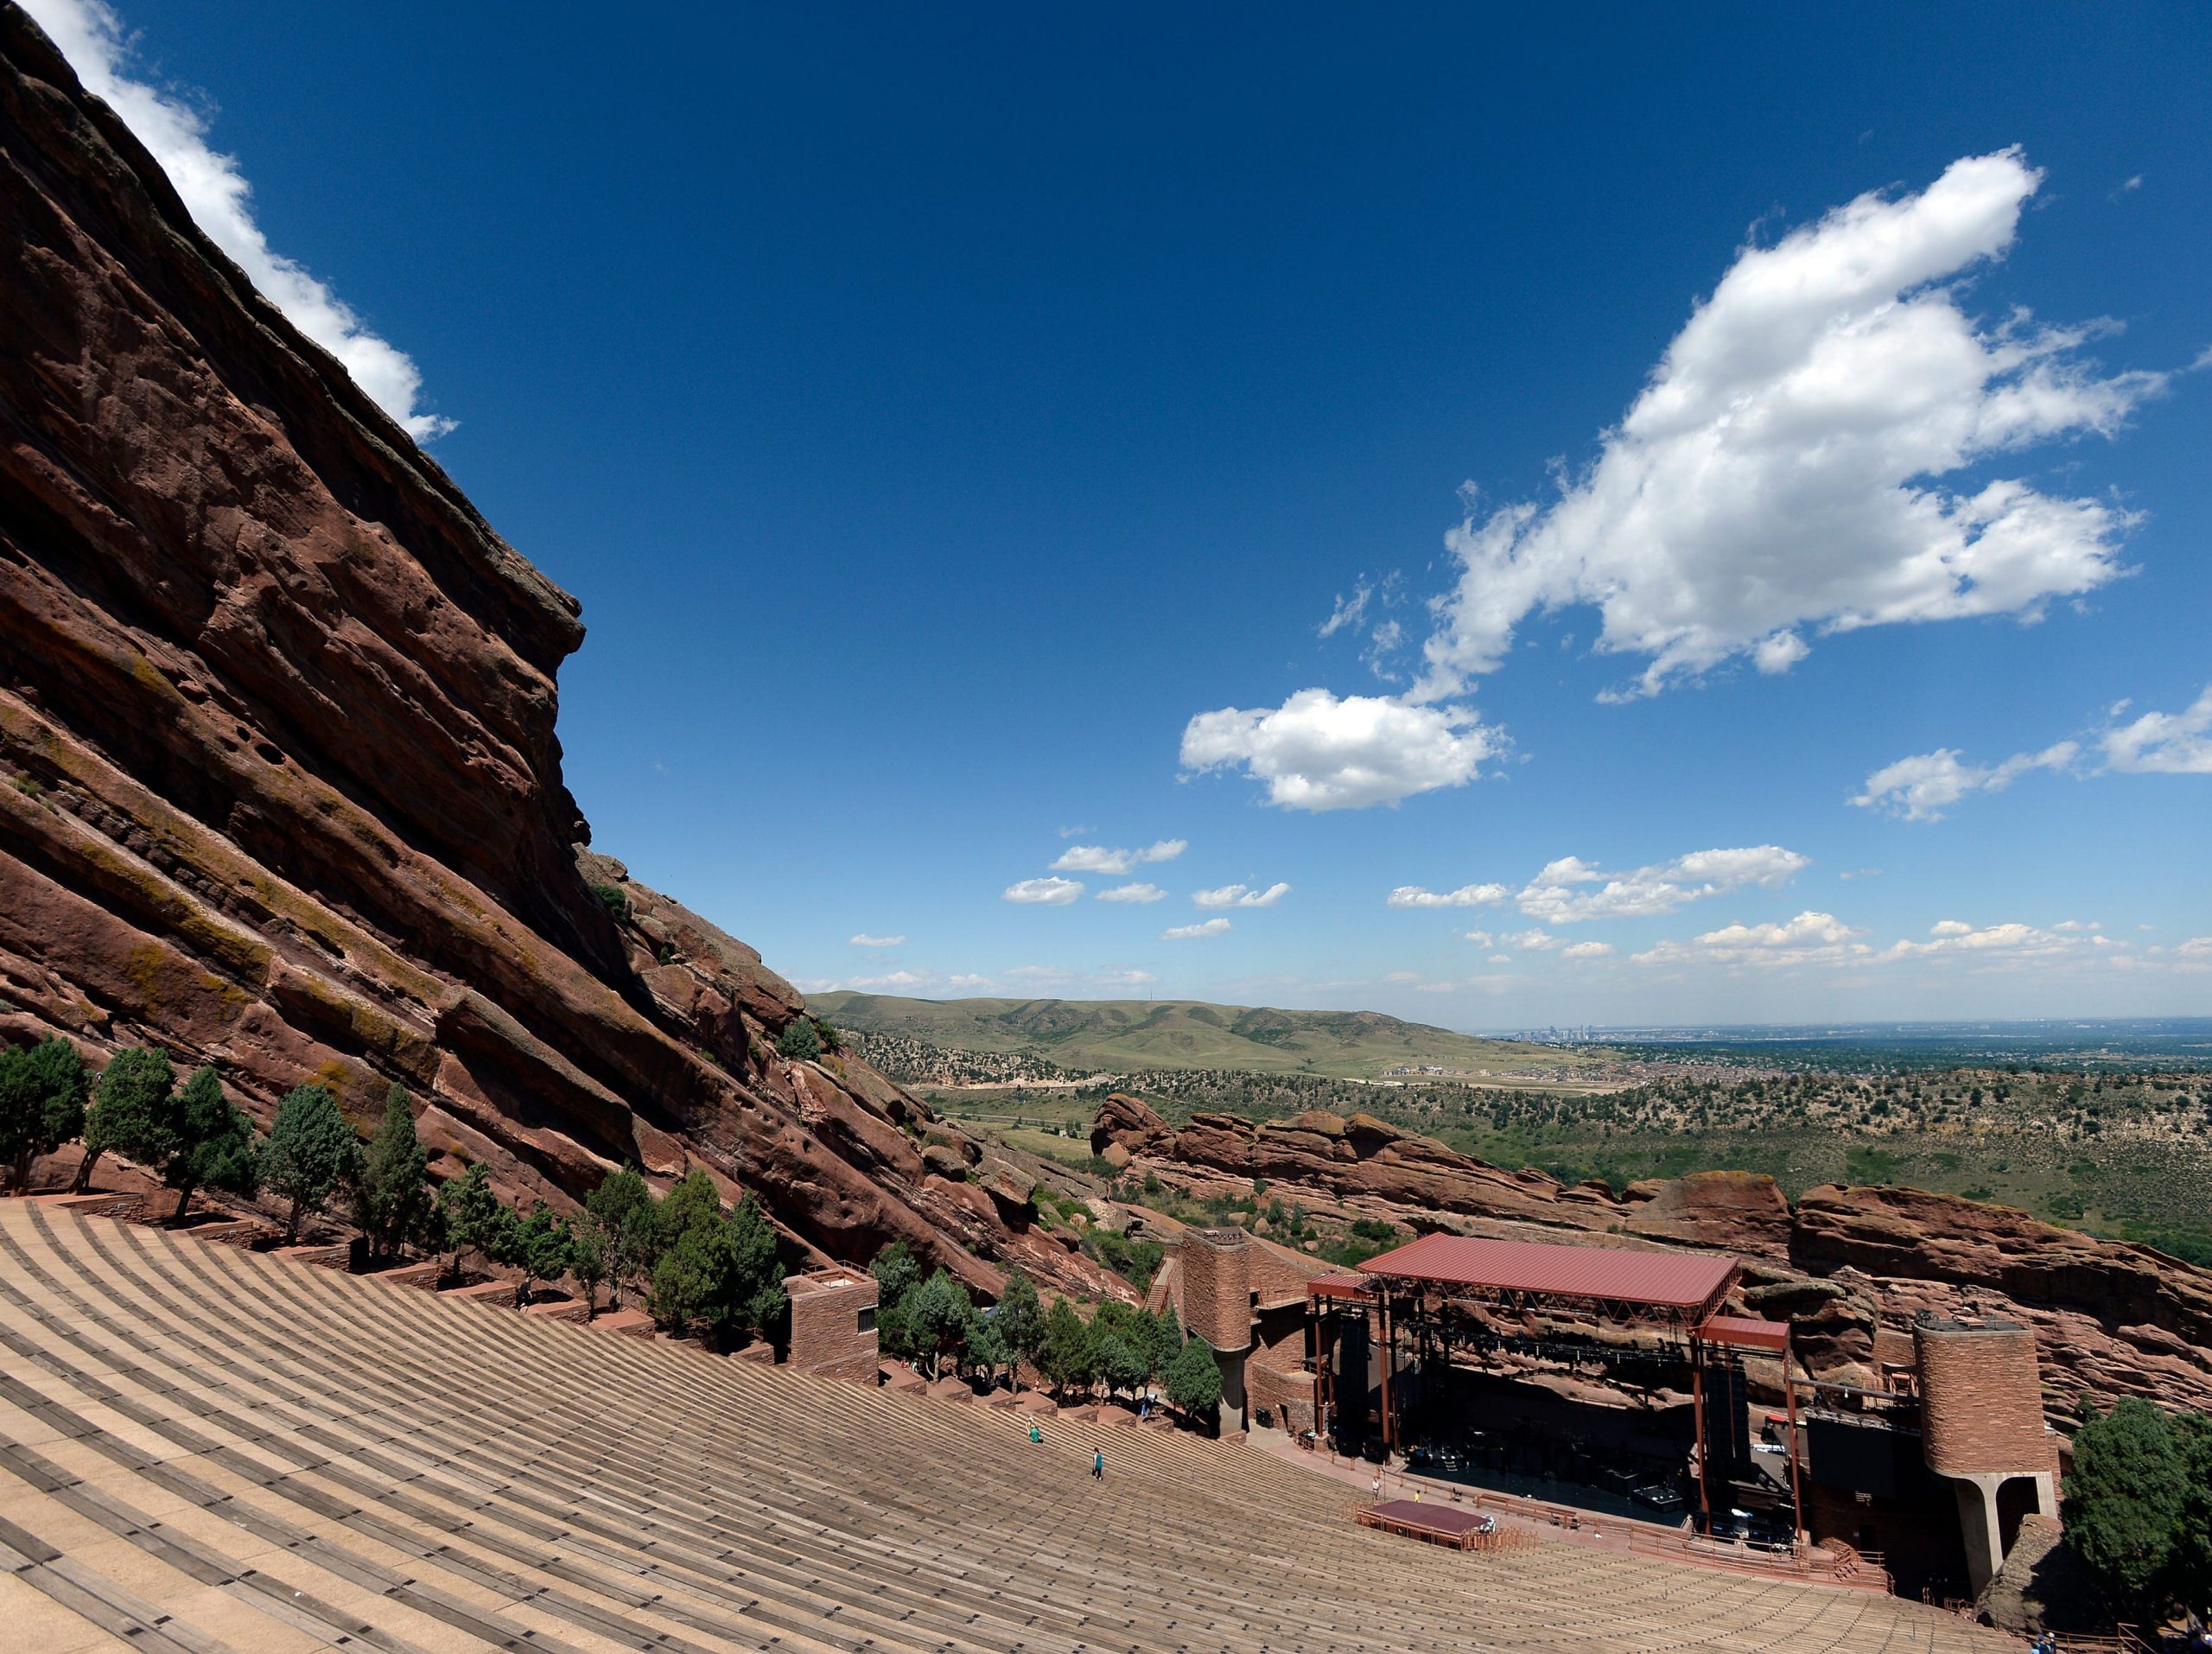 The empty amphitheater at Red Rocks with views of the mountains.